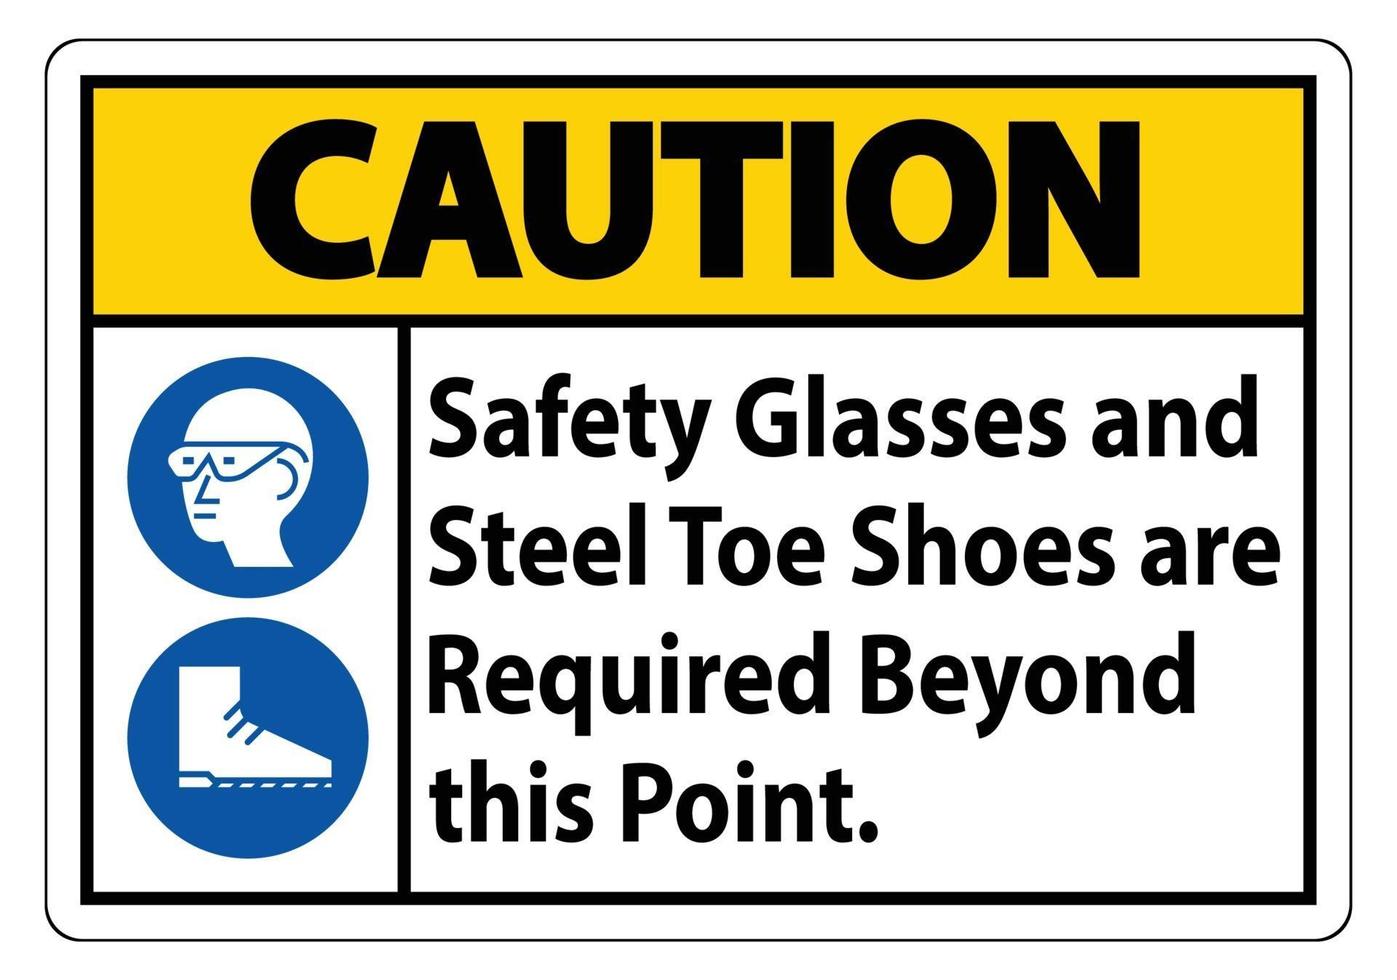 Caution Sign Safety Glasses And Steel Toe Shoes Are Required Beyond This Point vector